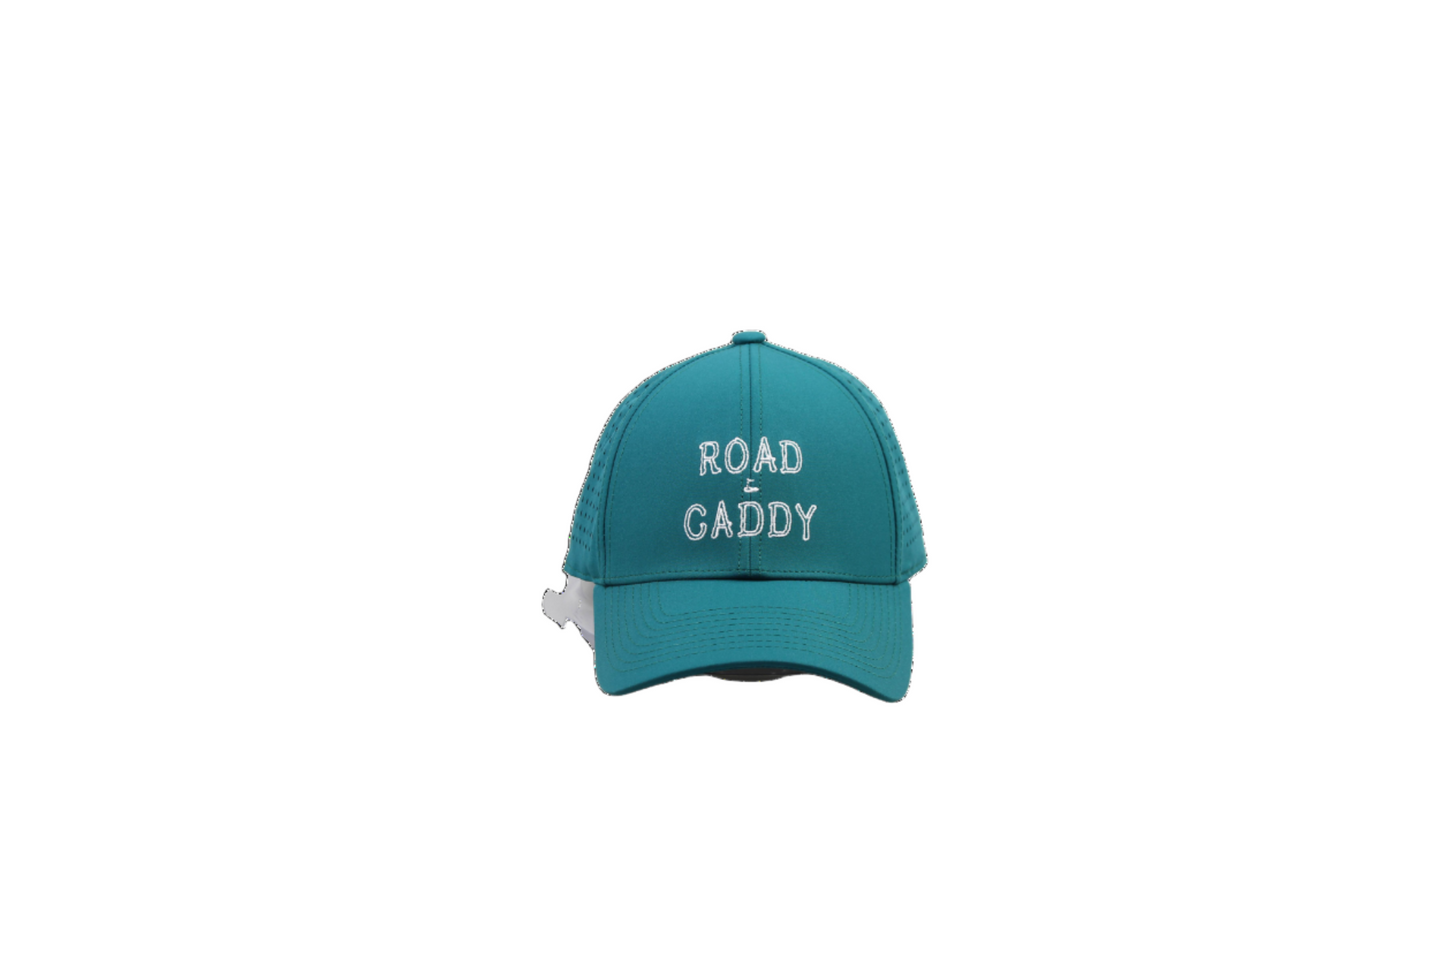 Road Caddy Sweat Resistant Uni-Sex Performance Hydro Golf Hat One Size Fits All - Unrivaled Comfort and Style